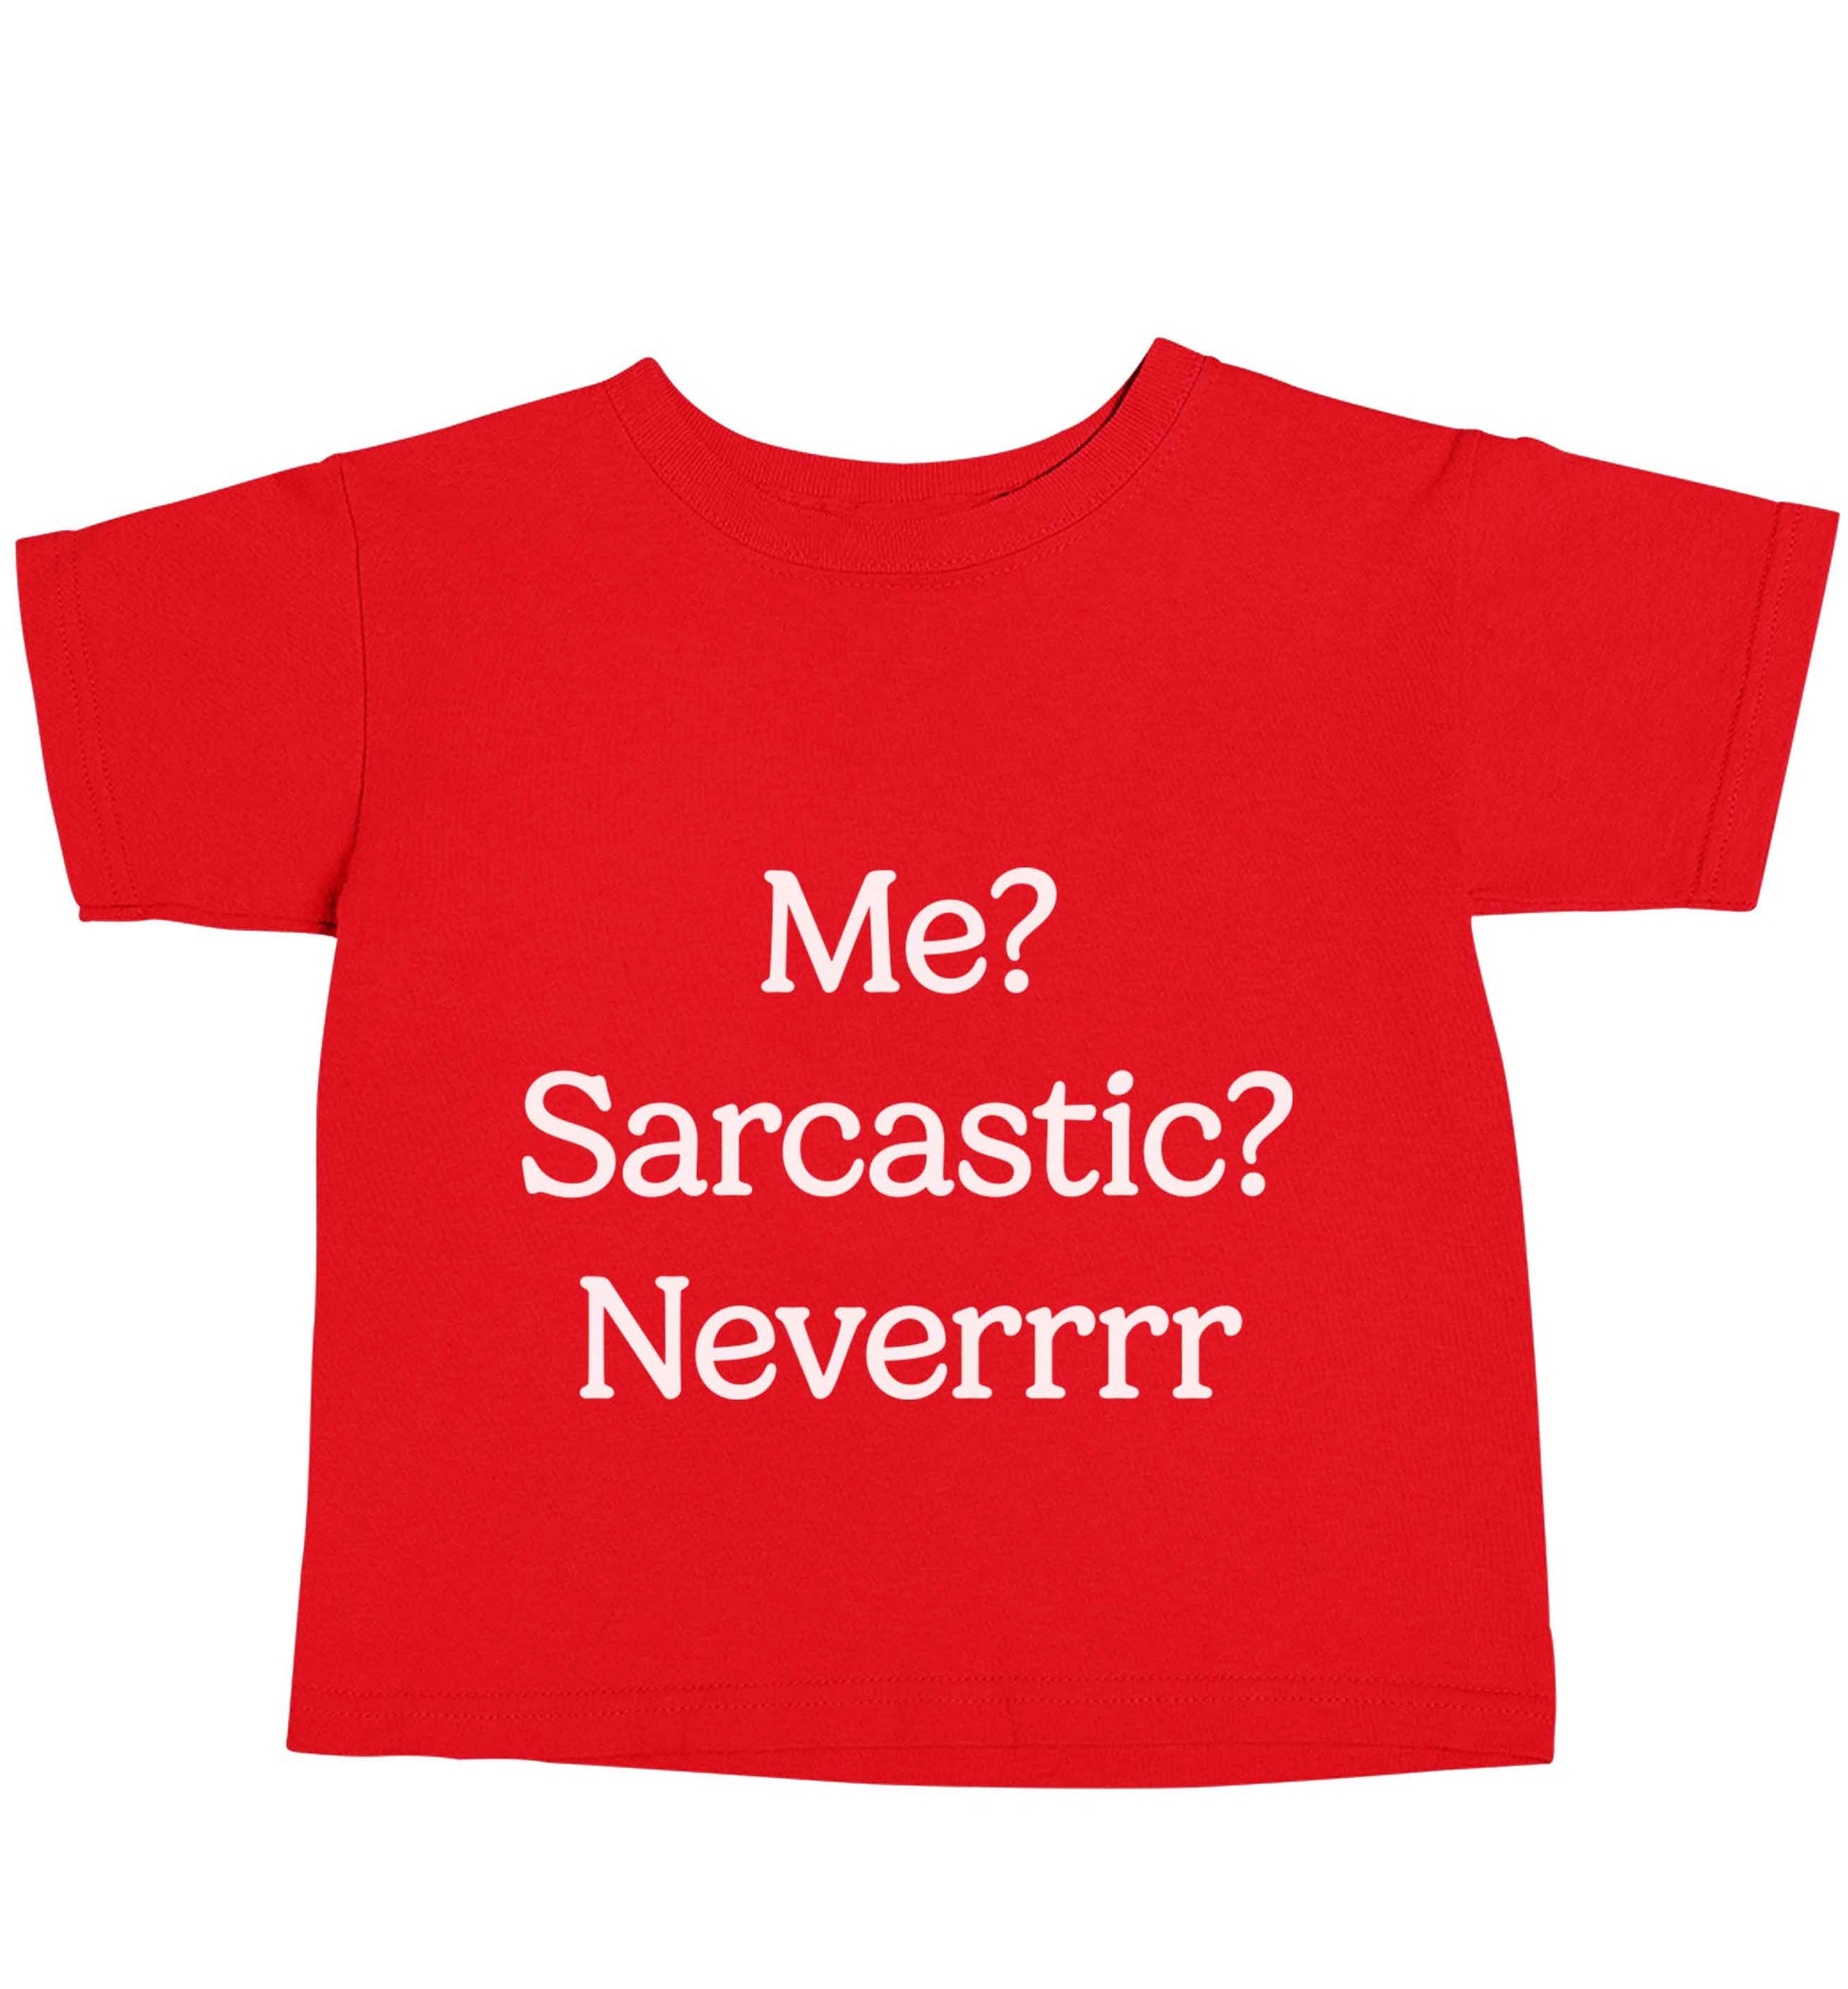 Me? sarcastic? never red baby toddler Tshirt 2 Years